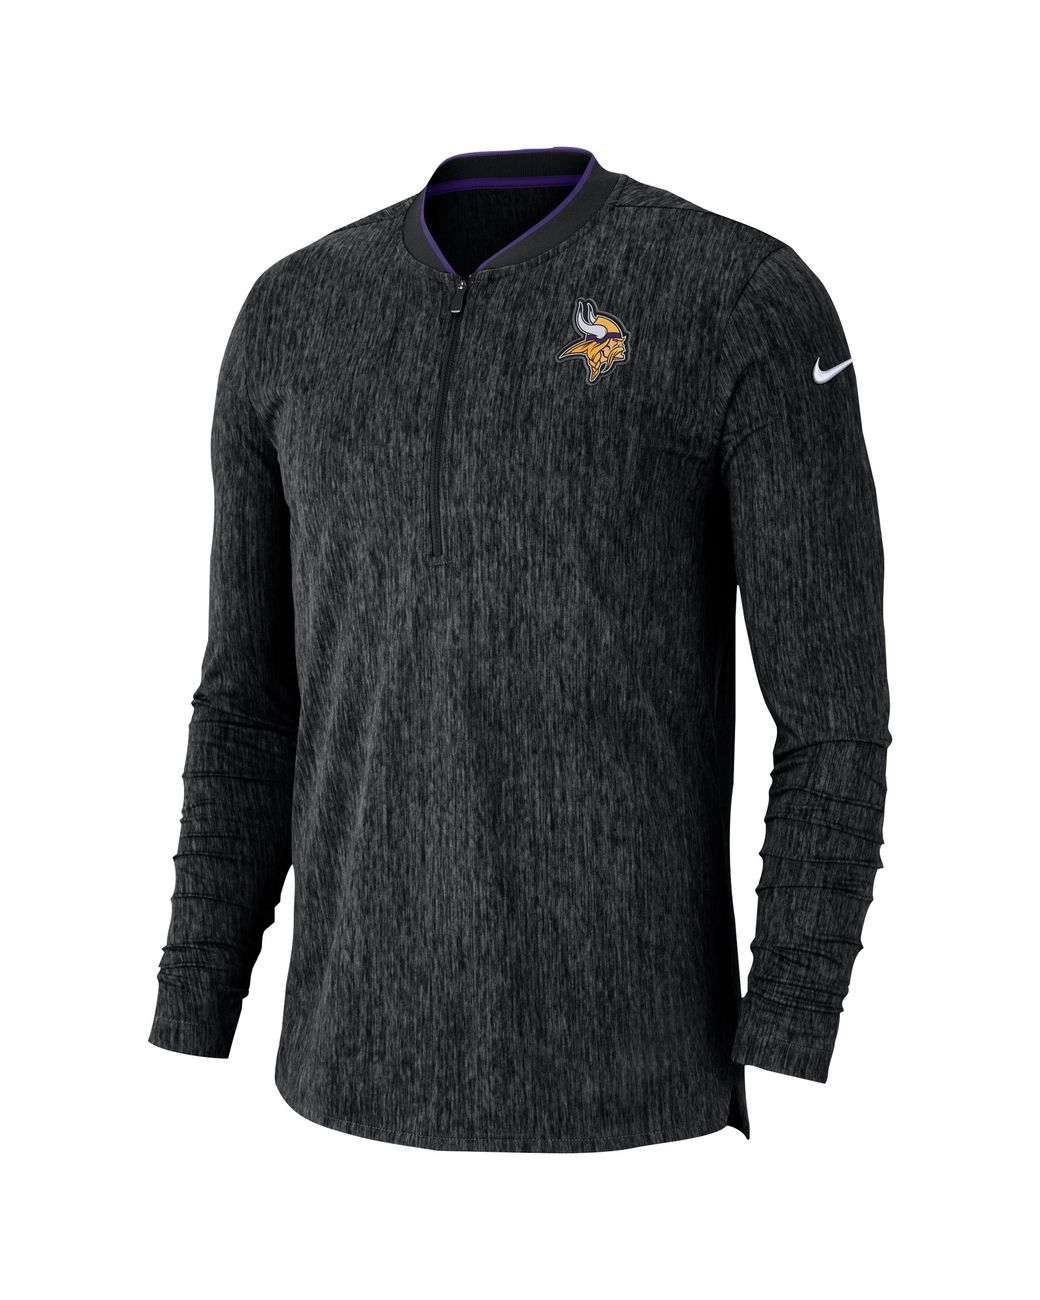 Nike Nfl Coaches Sideline 1/2 Zip Top in Black for Men - Save 16% - Lyst